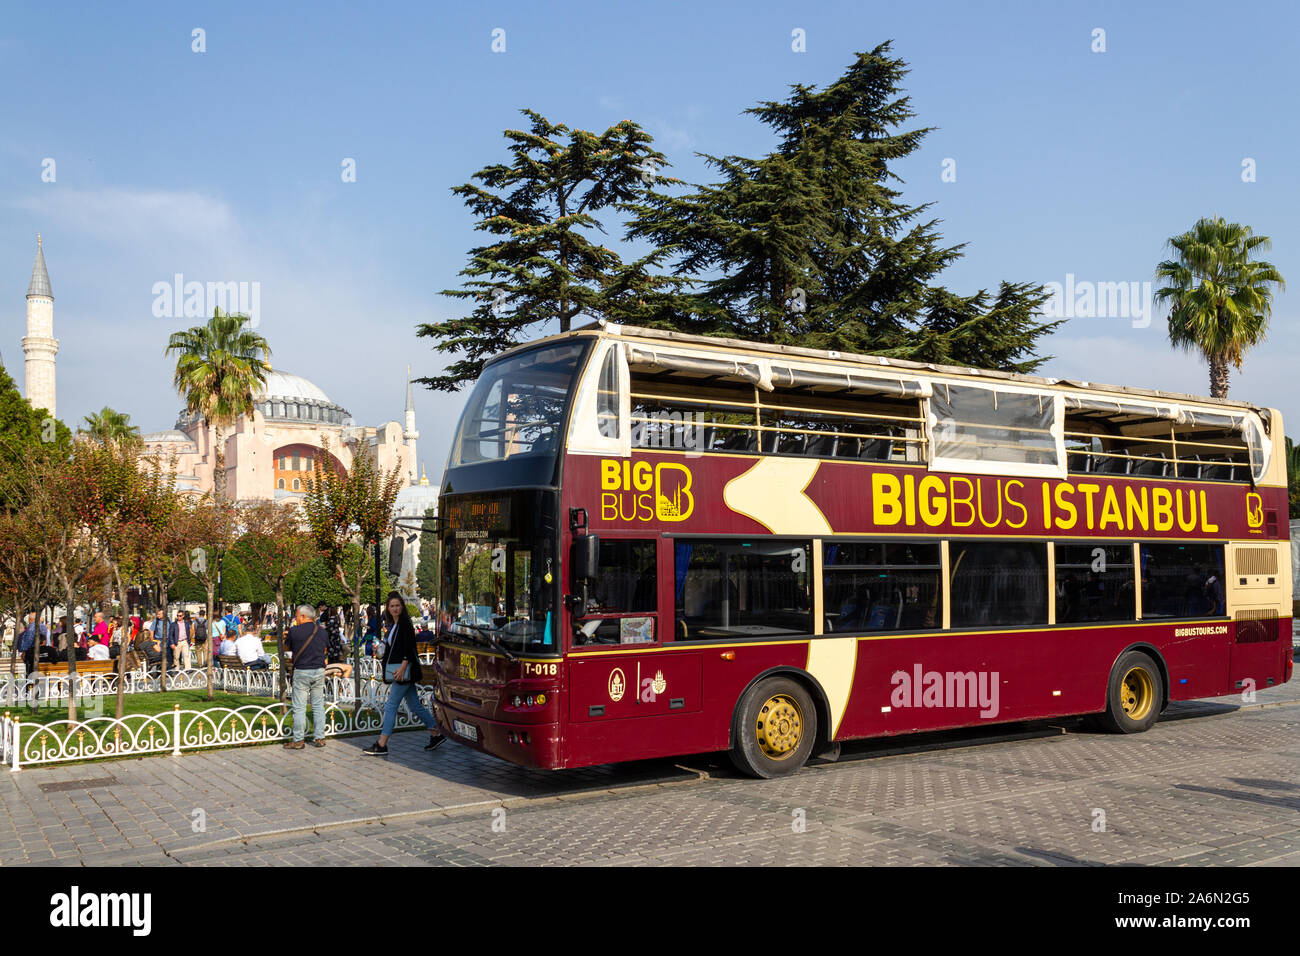 Sultanahmet, Istanbul / Turkey - October 18 2019: Big bus, hop on hop off Istanbul touristic city sightseeing tour bus Stock Photo